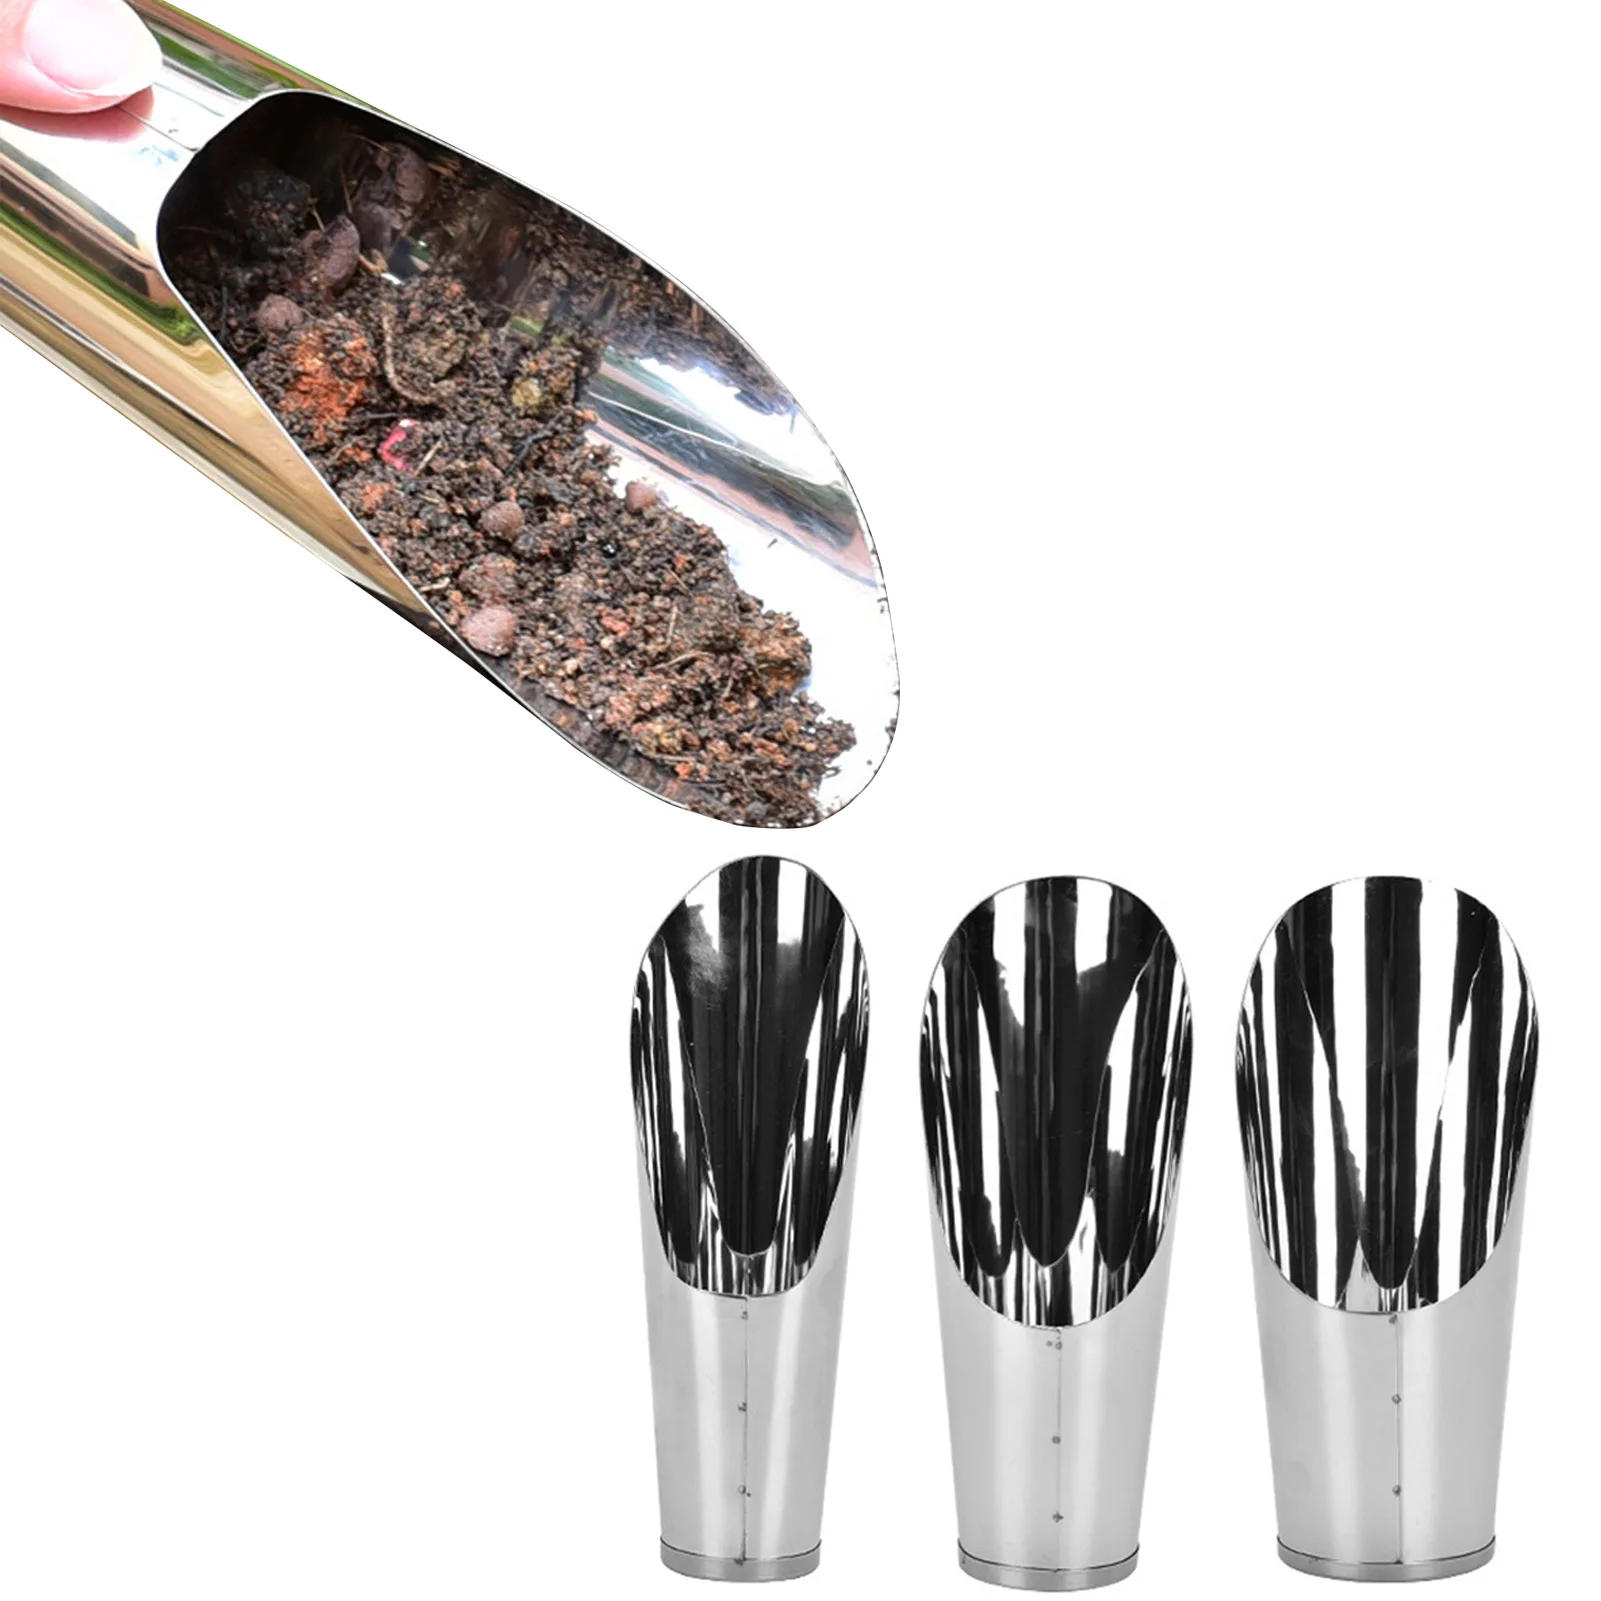 

Hand Gardening Scoop Succulent Tools Mini Garden Tools Plant Potting Mat As Plant Accessories Stainless Steel Hand Shovel For